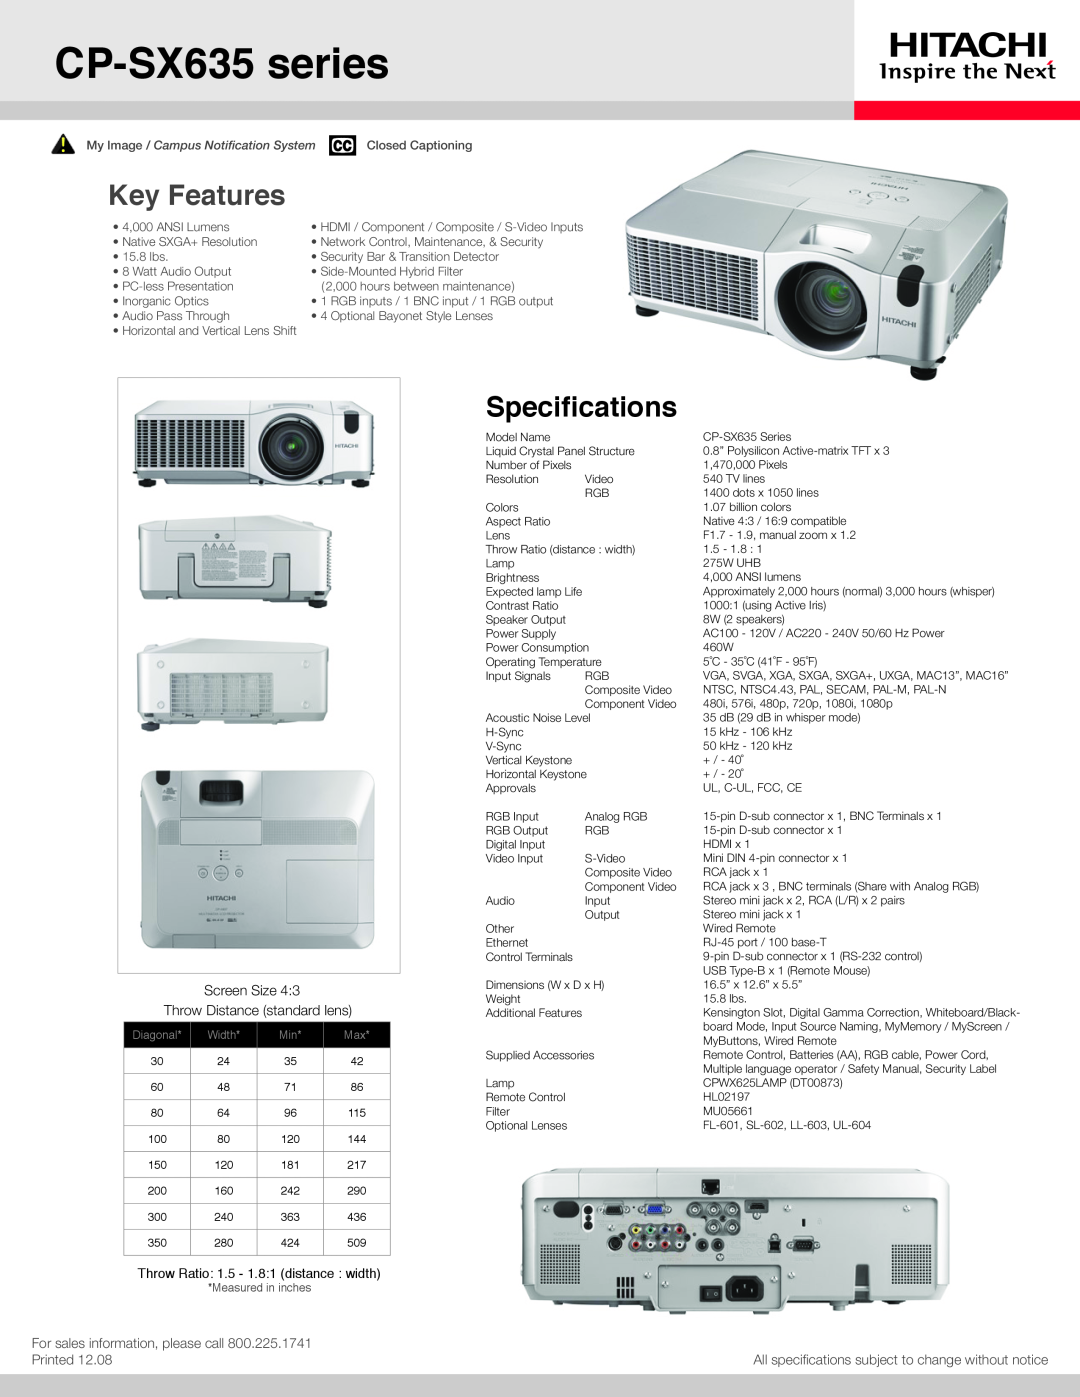 Hitachi specifications CP-SX635 series, Key Features, Specifications, Screen Size Throw Distance standard lens, Printed 